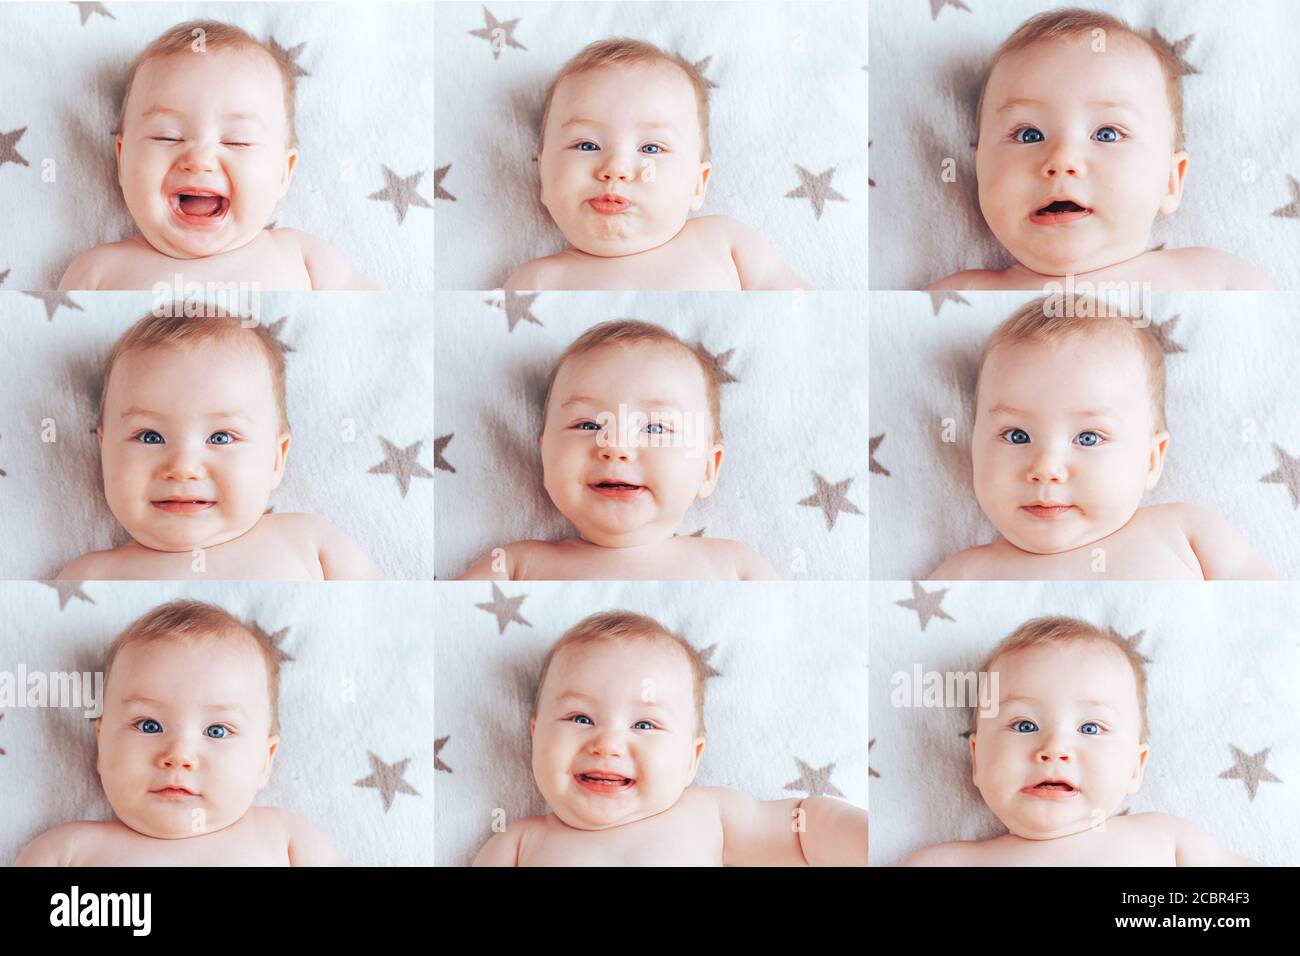 Collage Of Nine Pictures Of A Baby Pictures Of A Baby In Different Emotions A Newborn Baby With Blue Eyes And Blond Hair Stock Photo Alamy